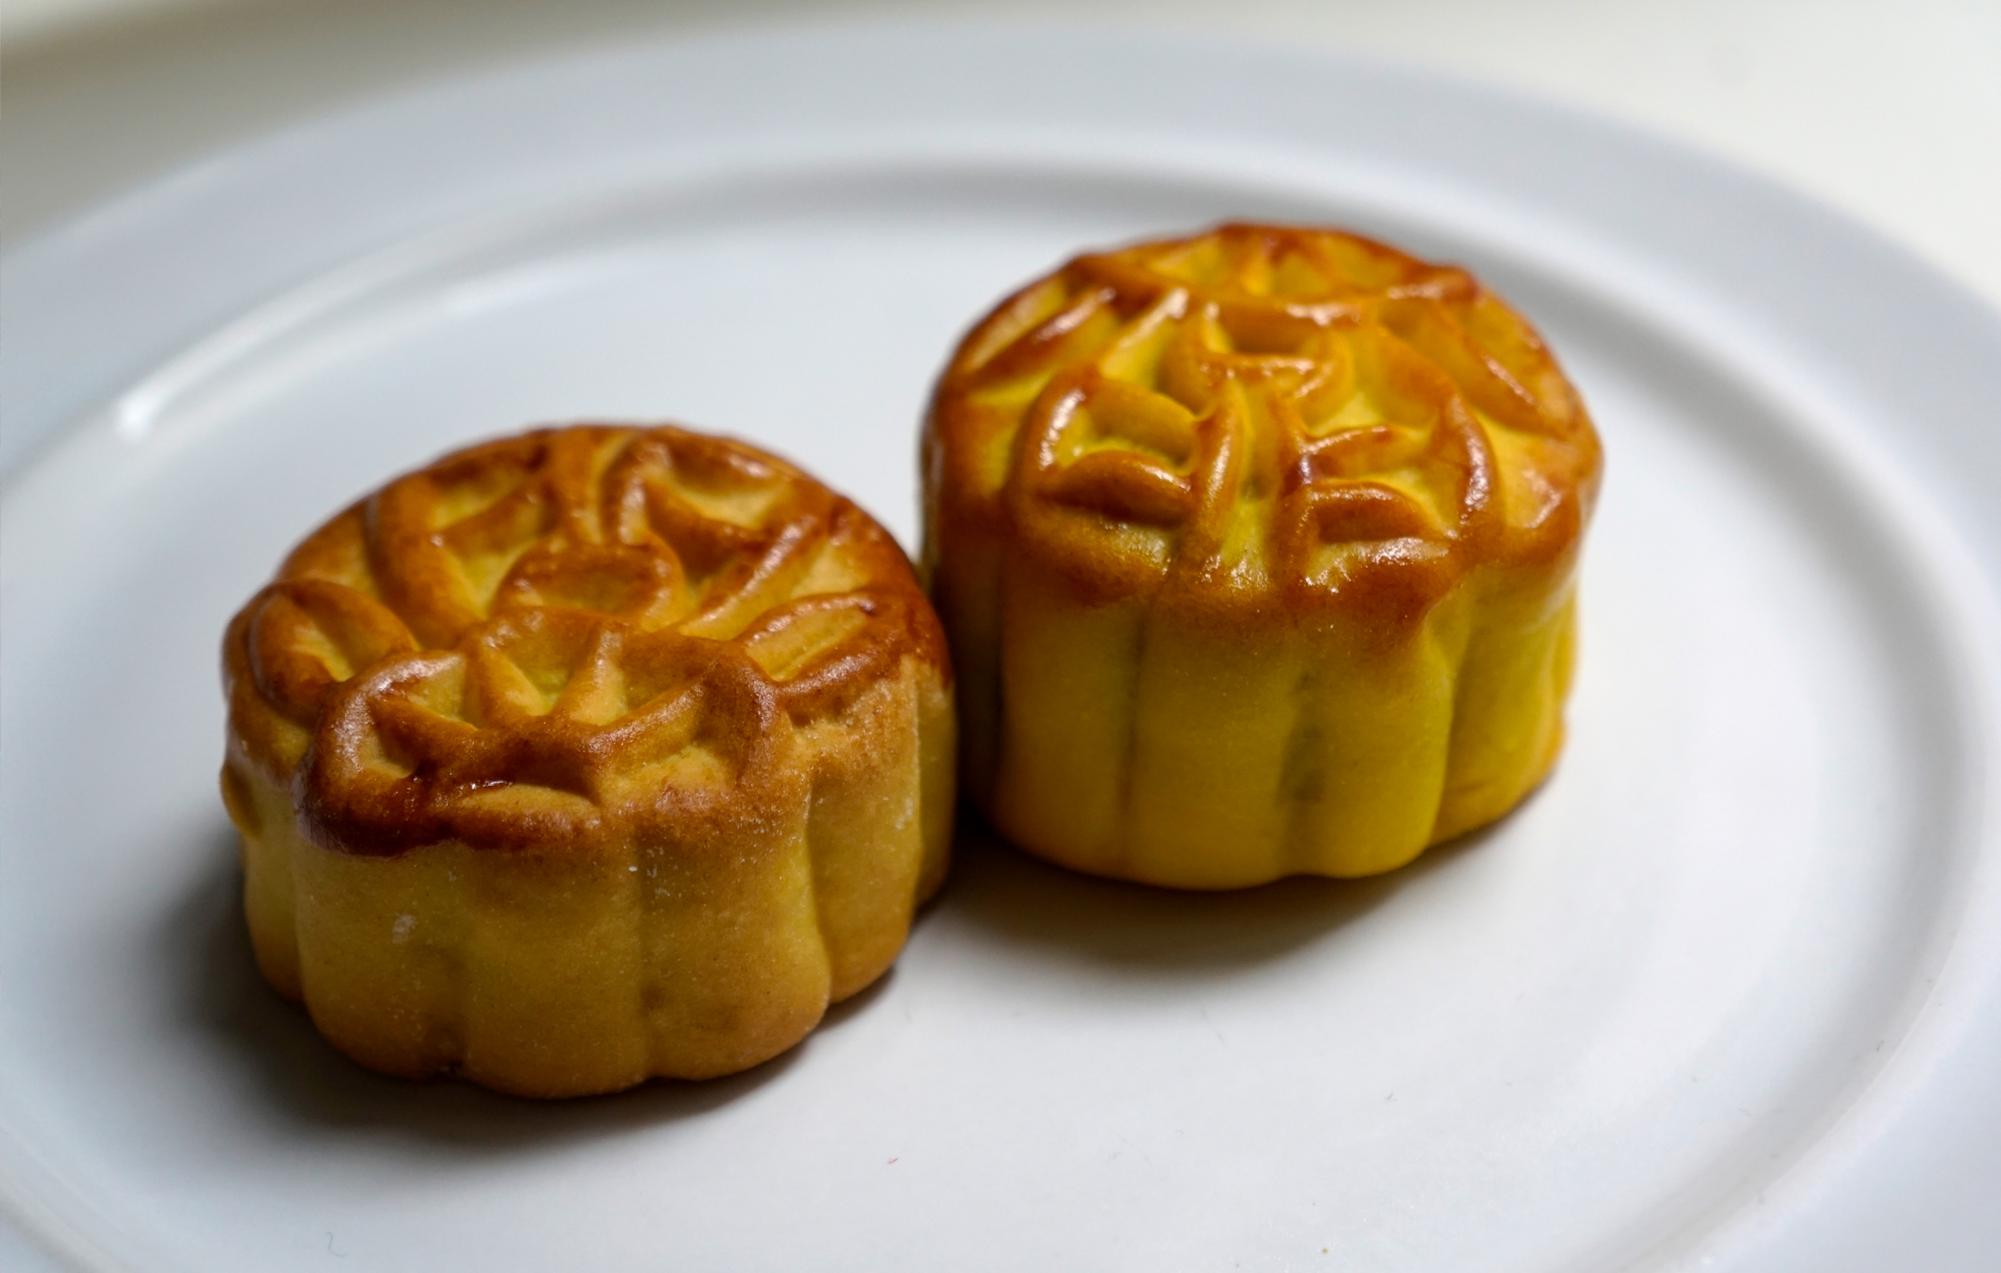 Moonstruck+for+mooncakes+at+the+Mid-Autumn+Festival